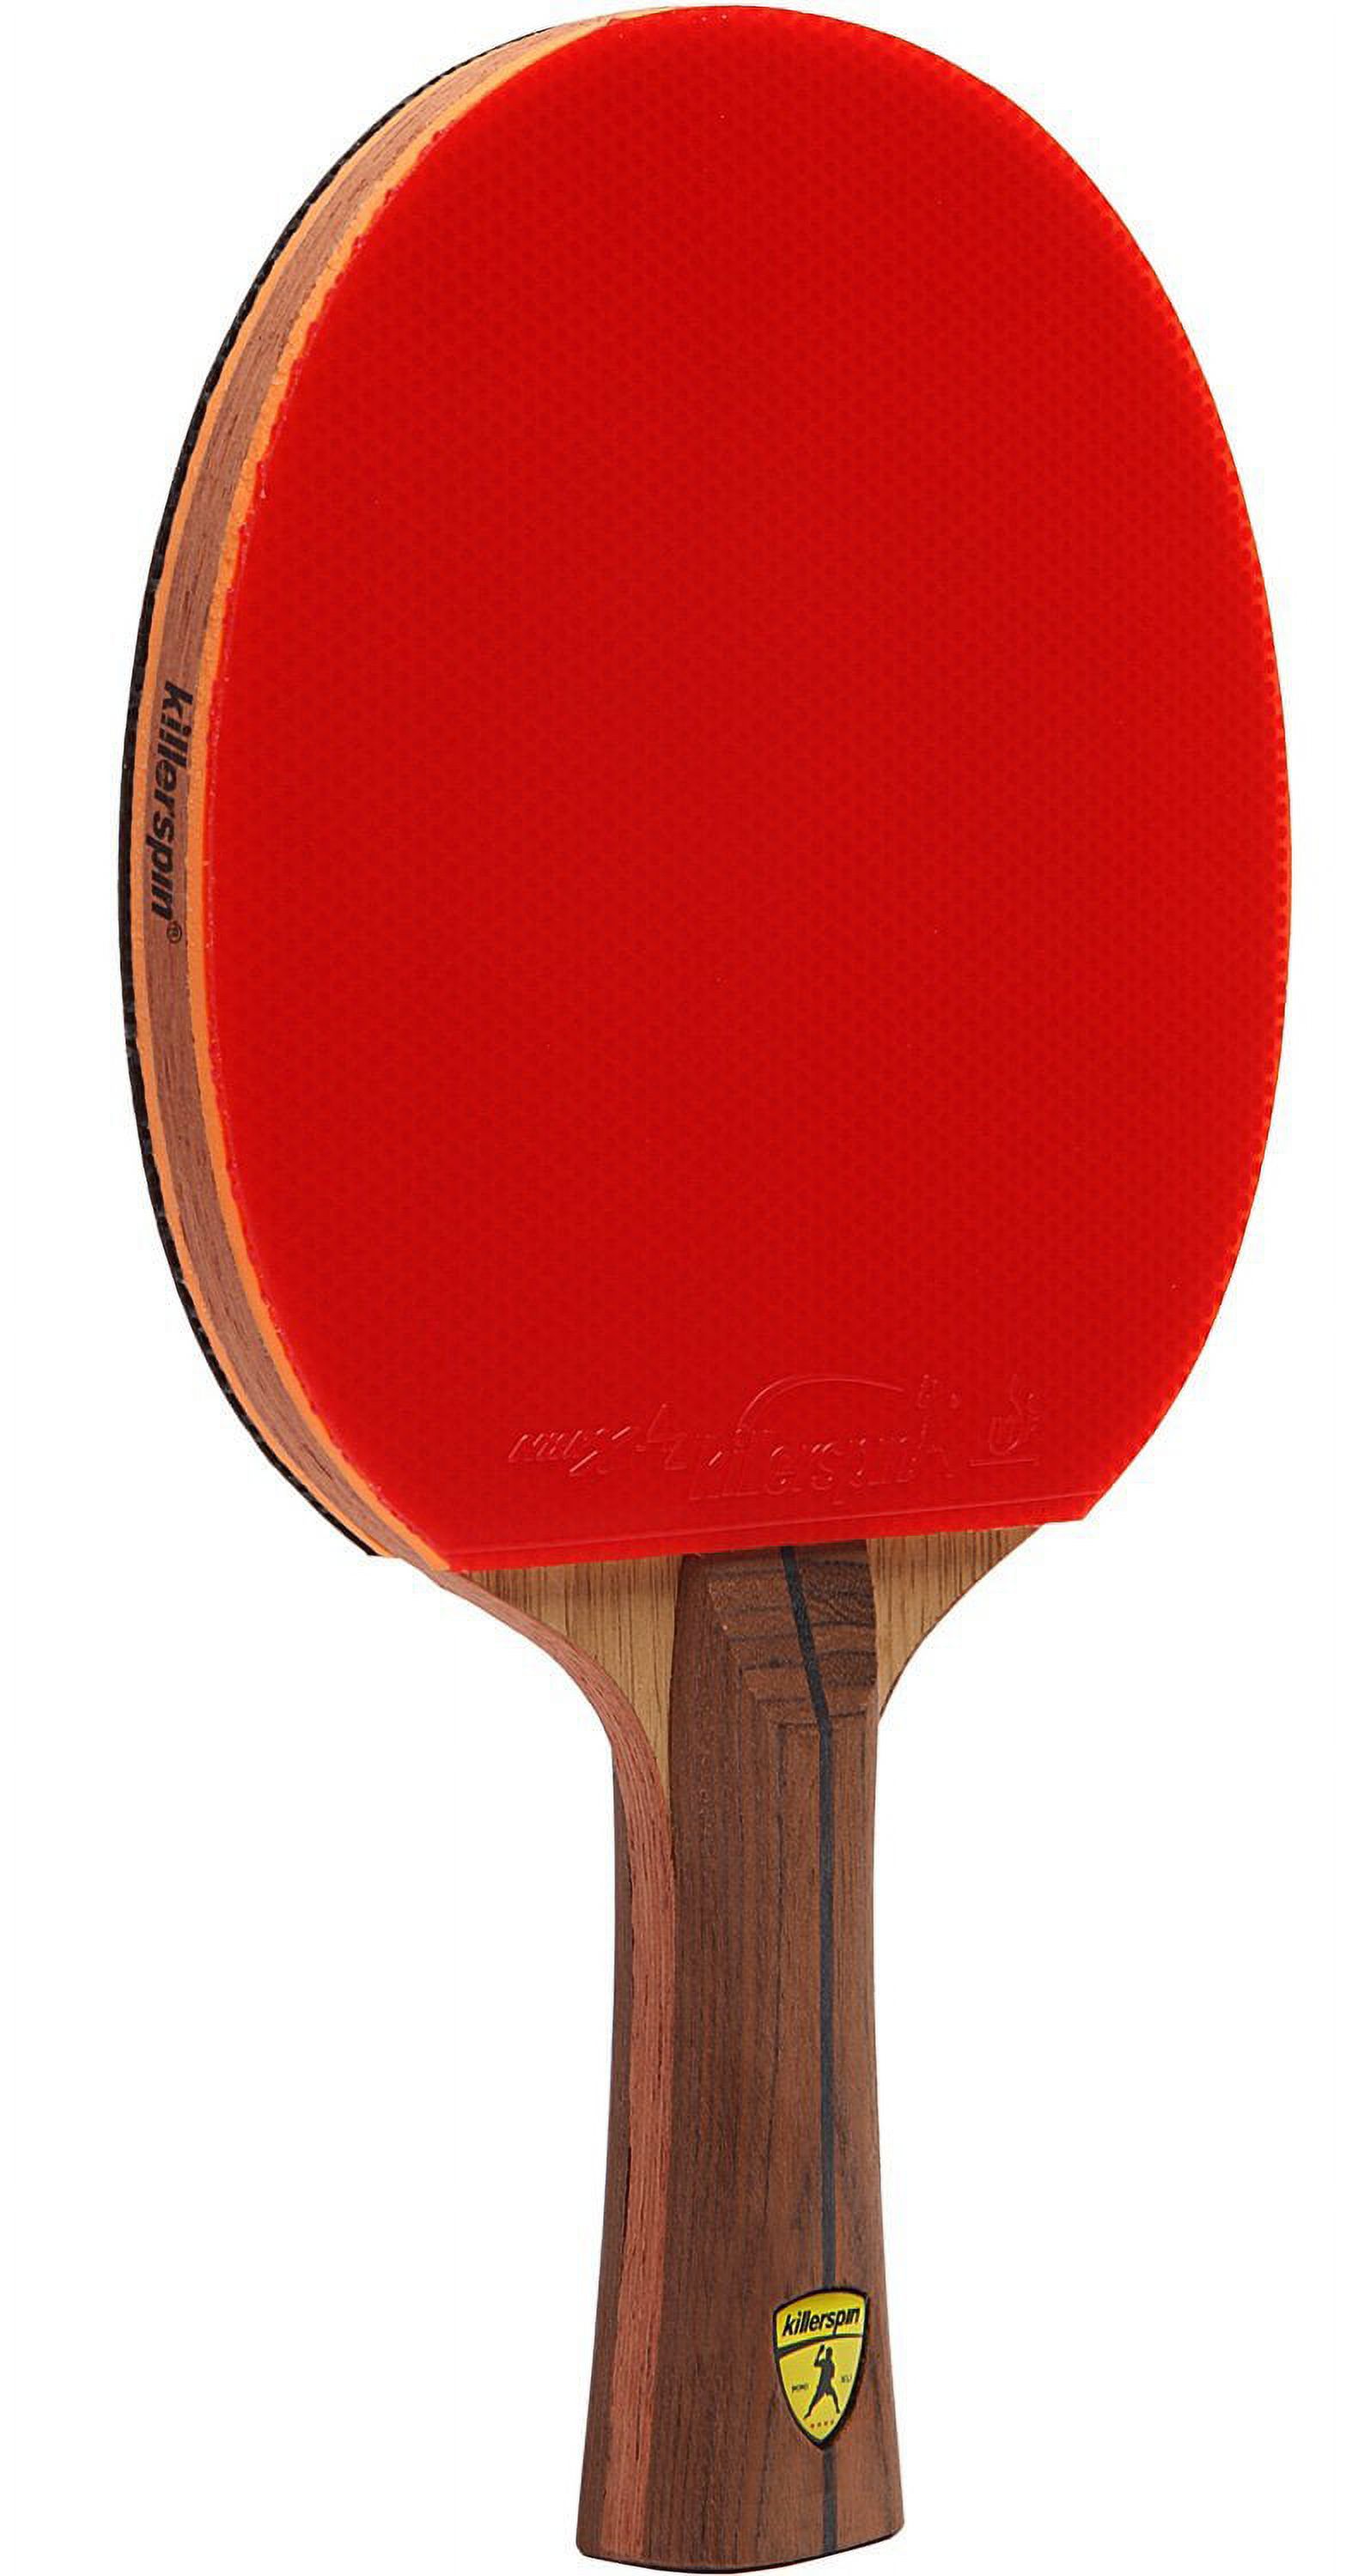 Killerspin JET800 SPEED N1 Advanced Level Table Tennis Paddle, Red - image 5 of 9